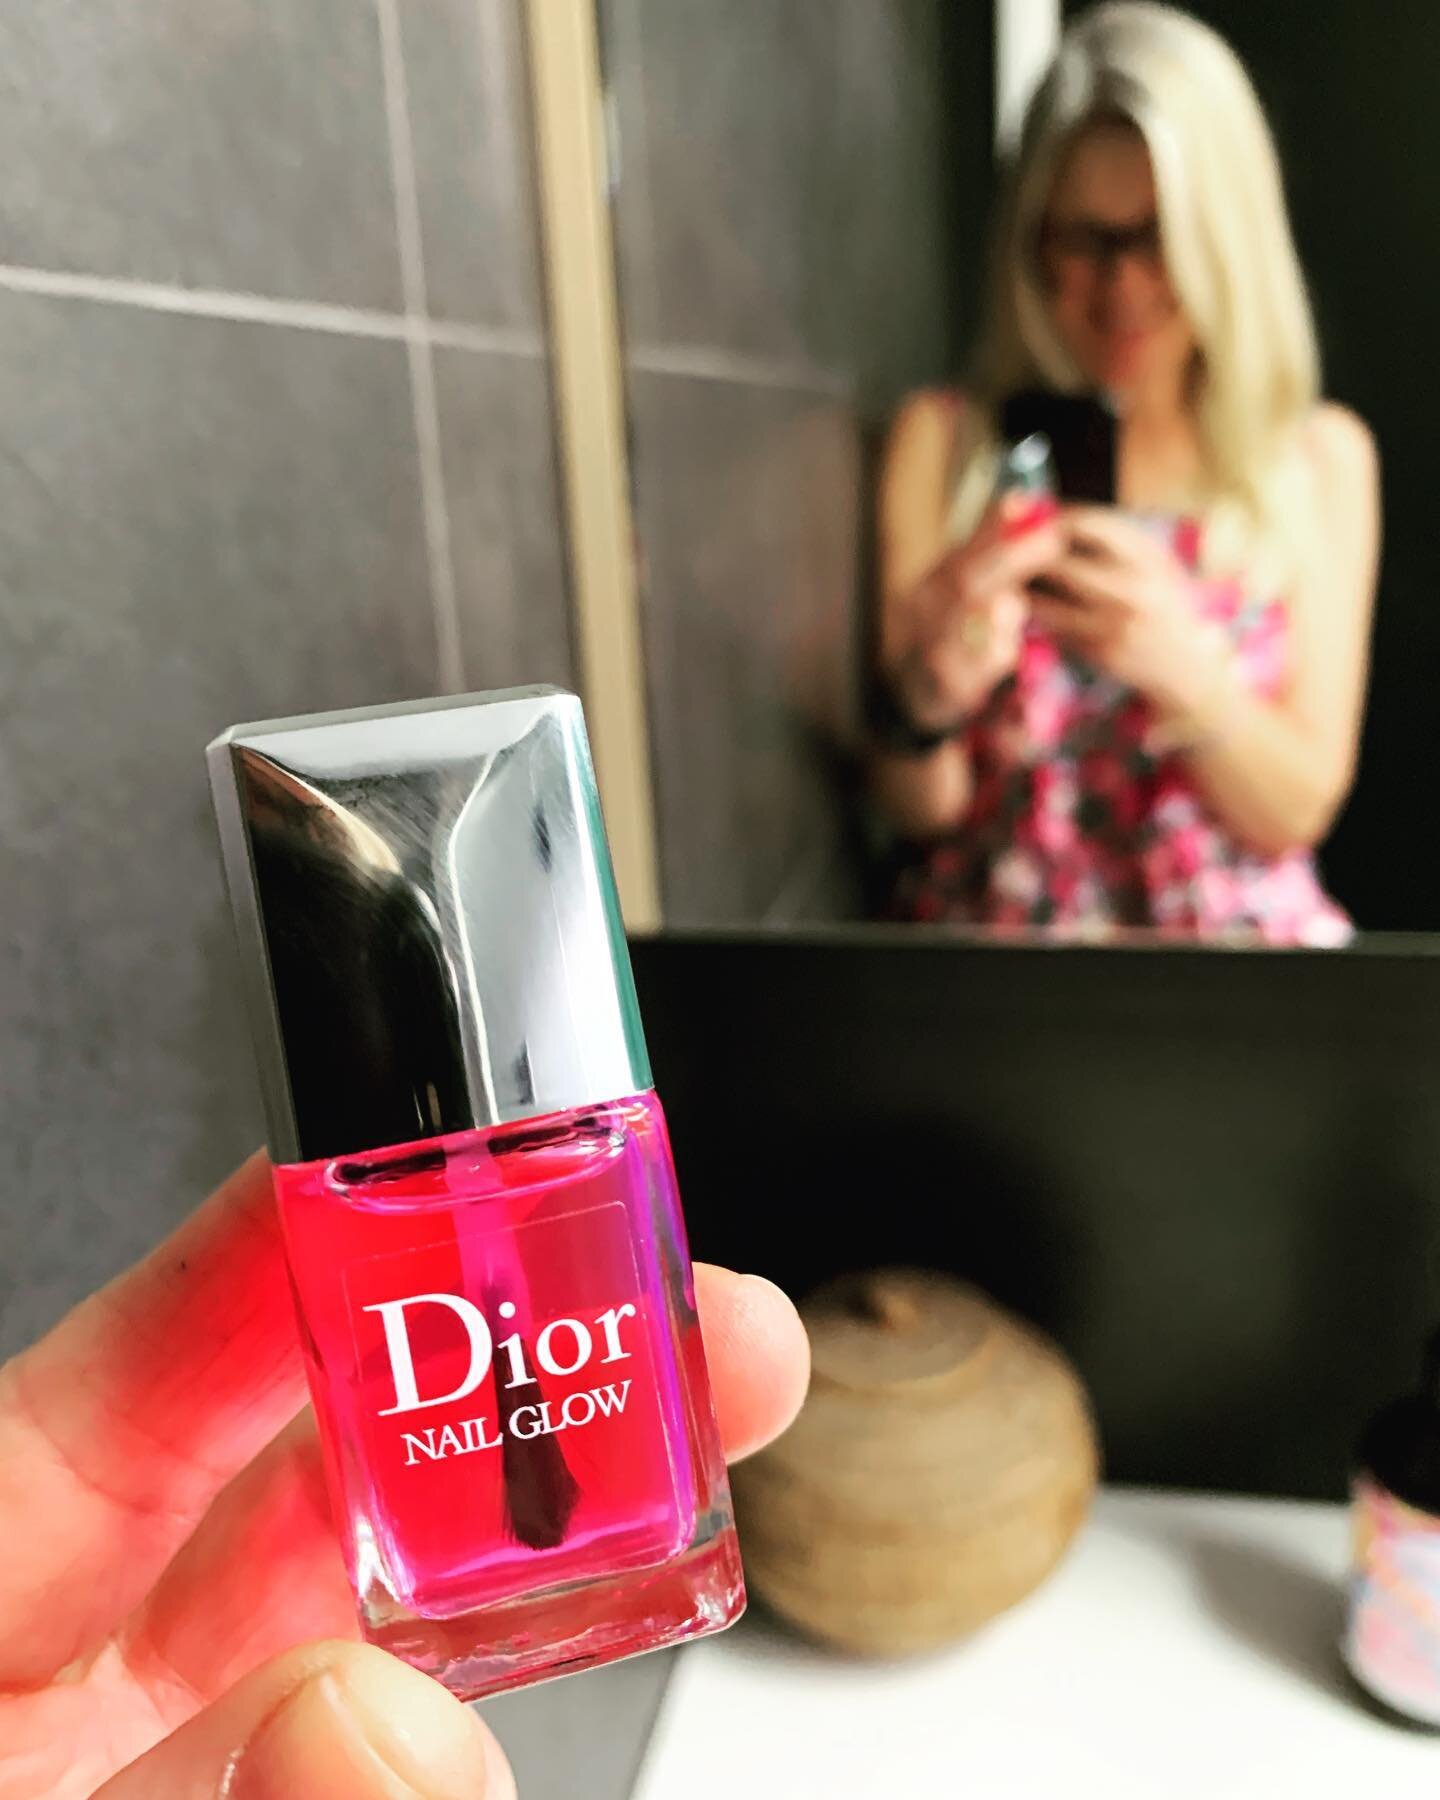 As much as I love my local nail bar I love an easy DIY a tad more 💫 This is a long-time French beauty love. Just two quick coats for elevated, natural-looking nails 🤍🤍🤍 $40. @diorbeauty @myer 
.
.
.
.
#notsponsored #whatiuse #beautyover45 #beauty